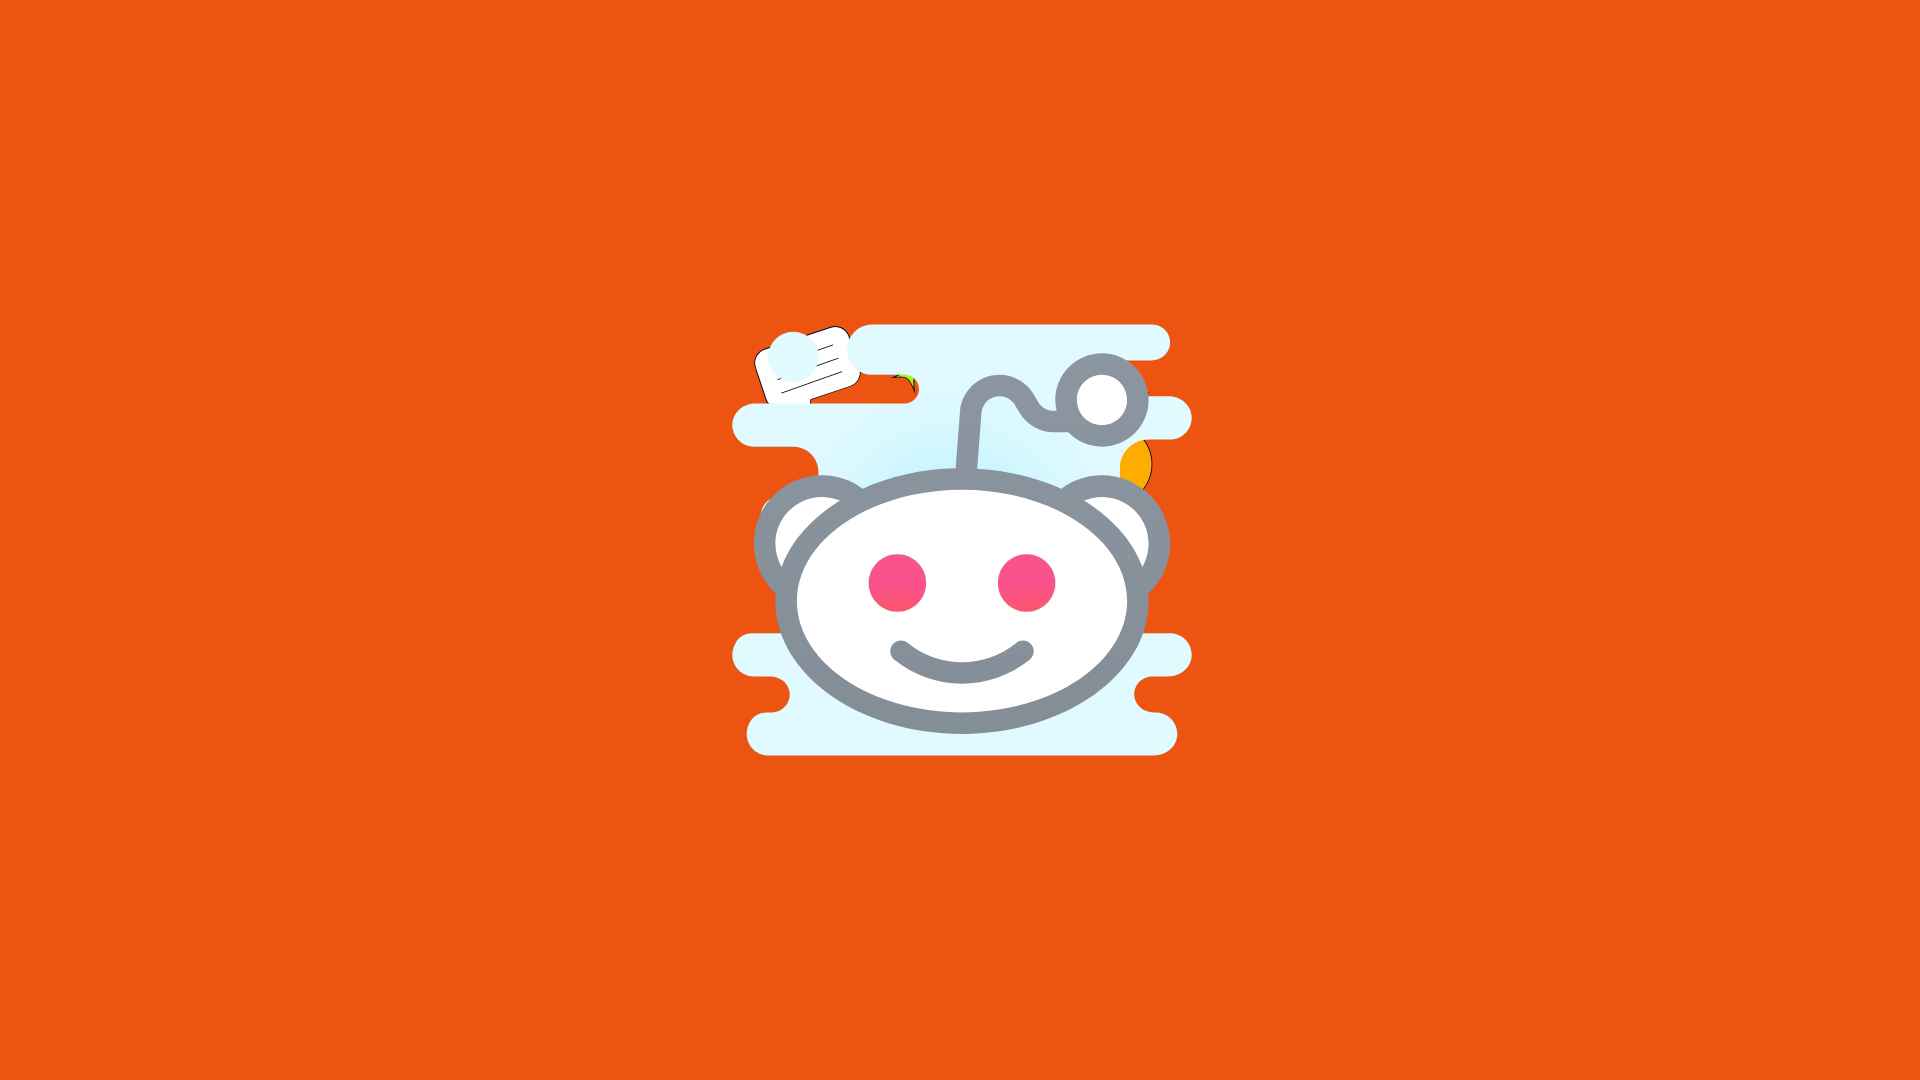 Are there any features or tools on Reddit that help with content moderation or organization?